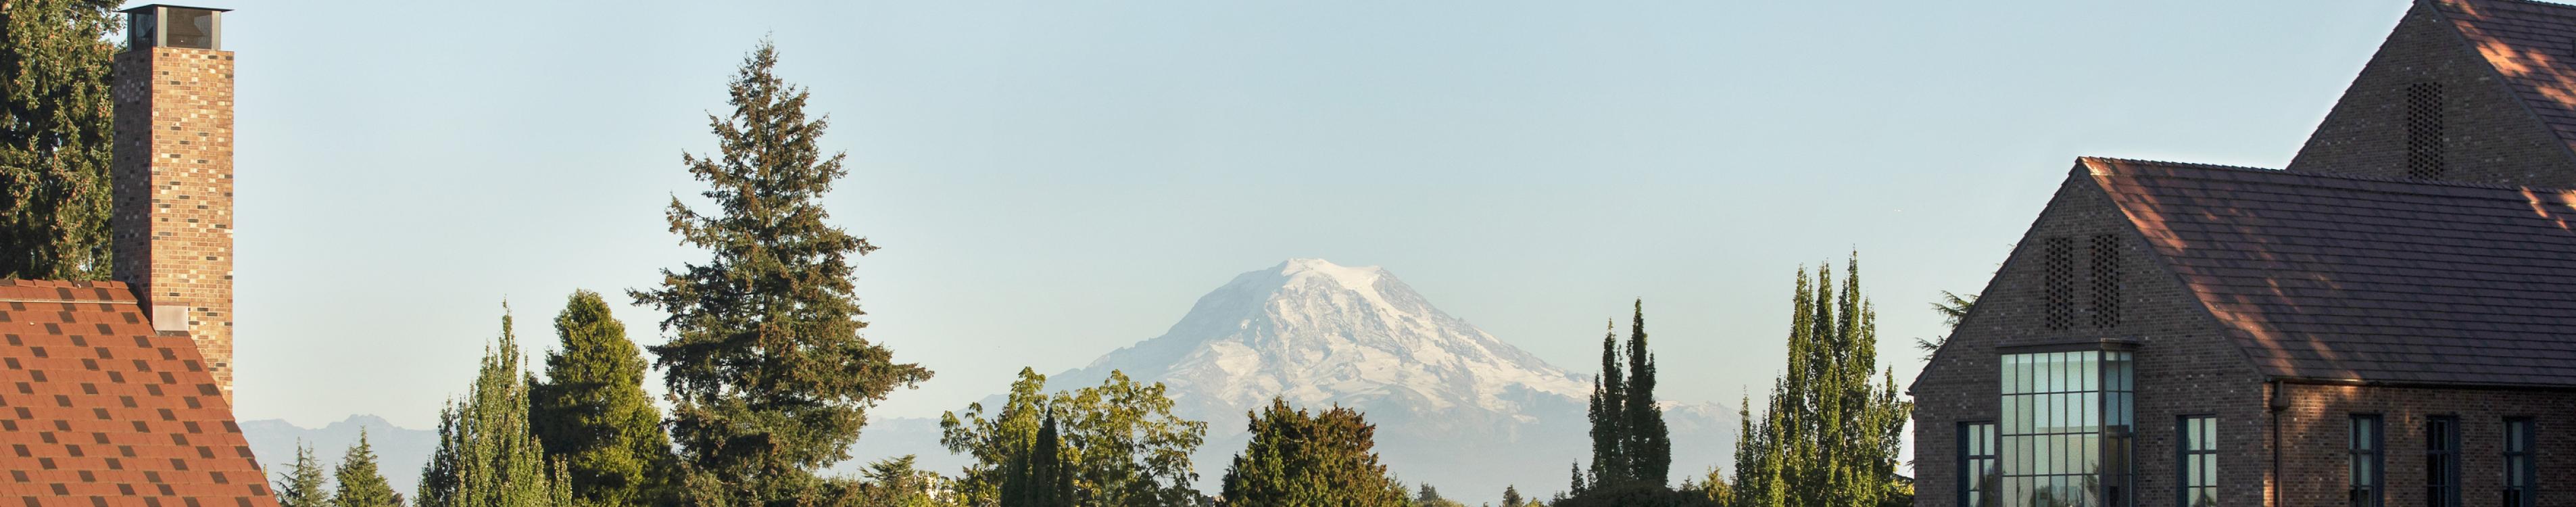 Campus with Mt. Rainier in the background